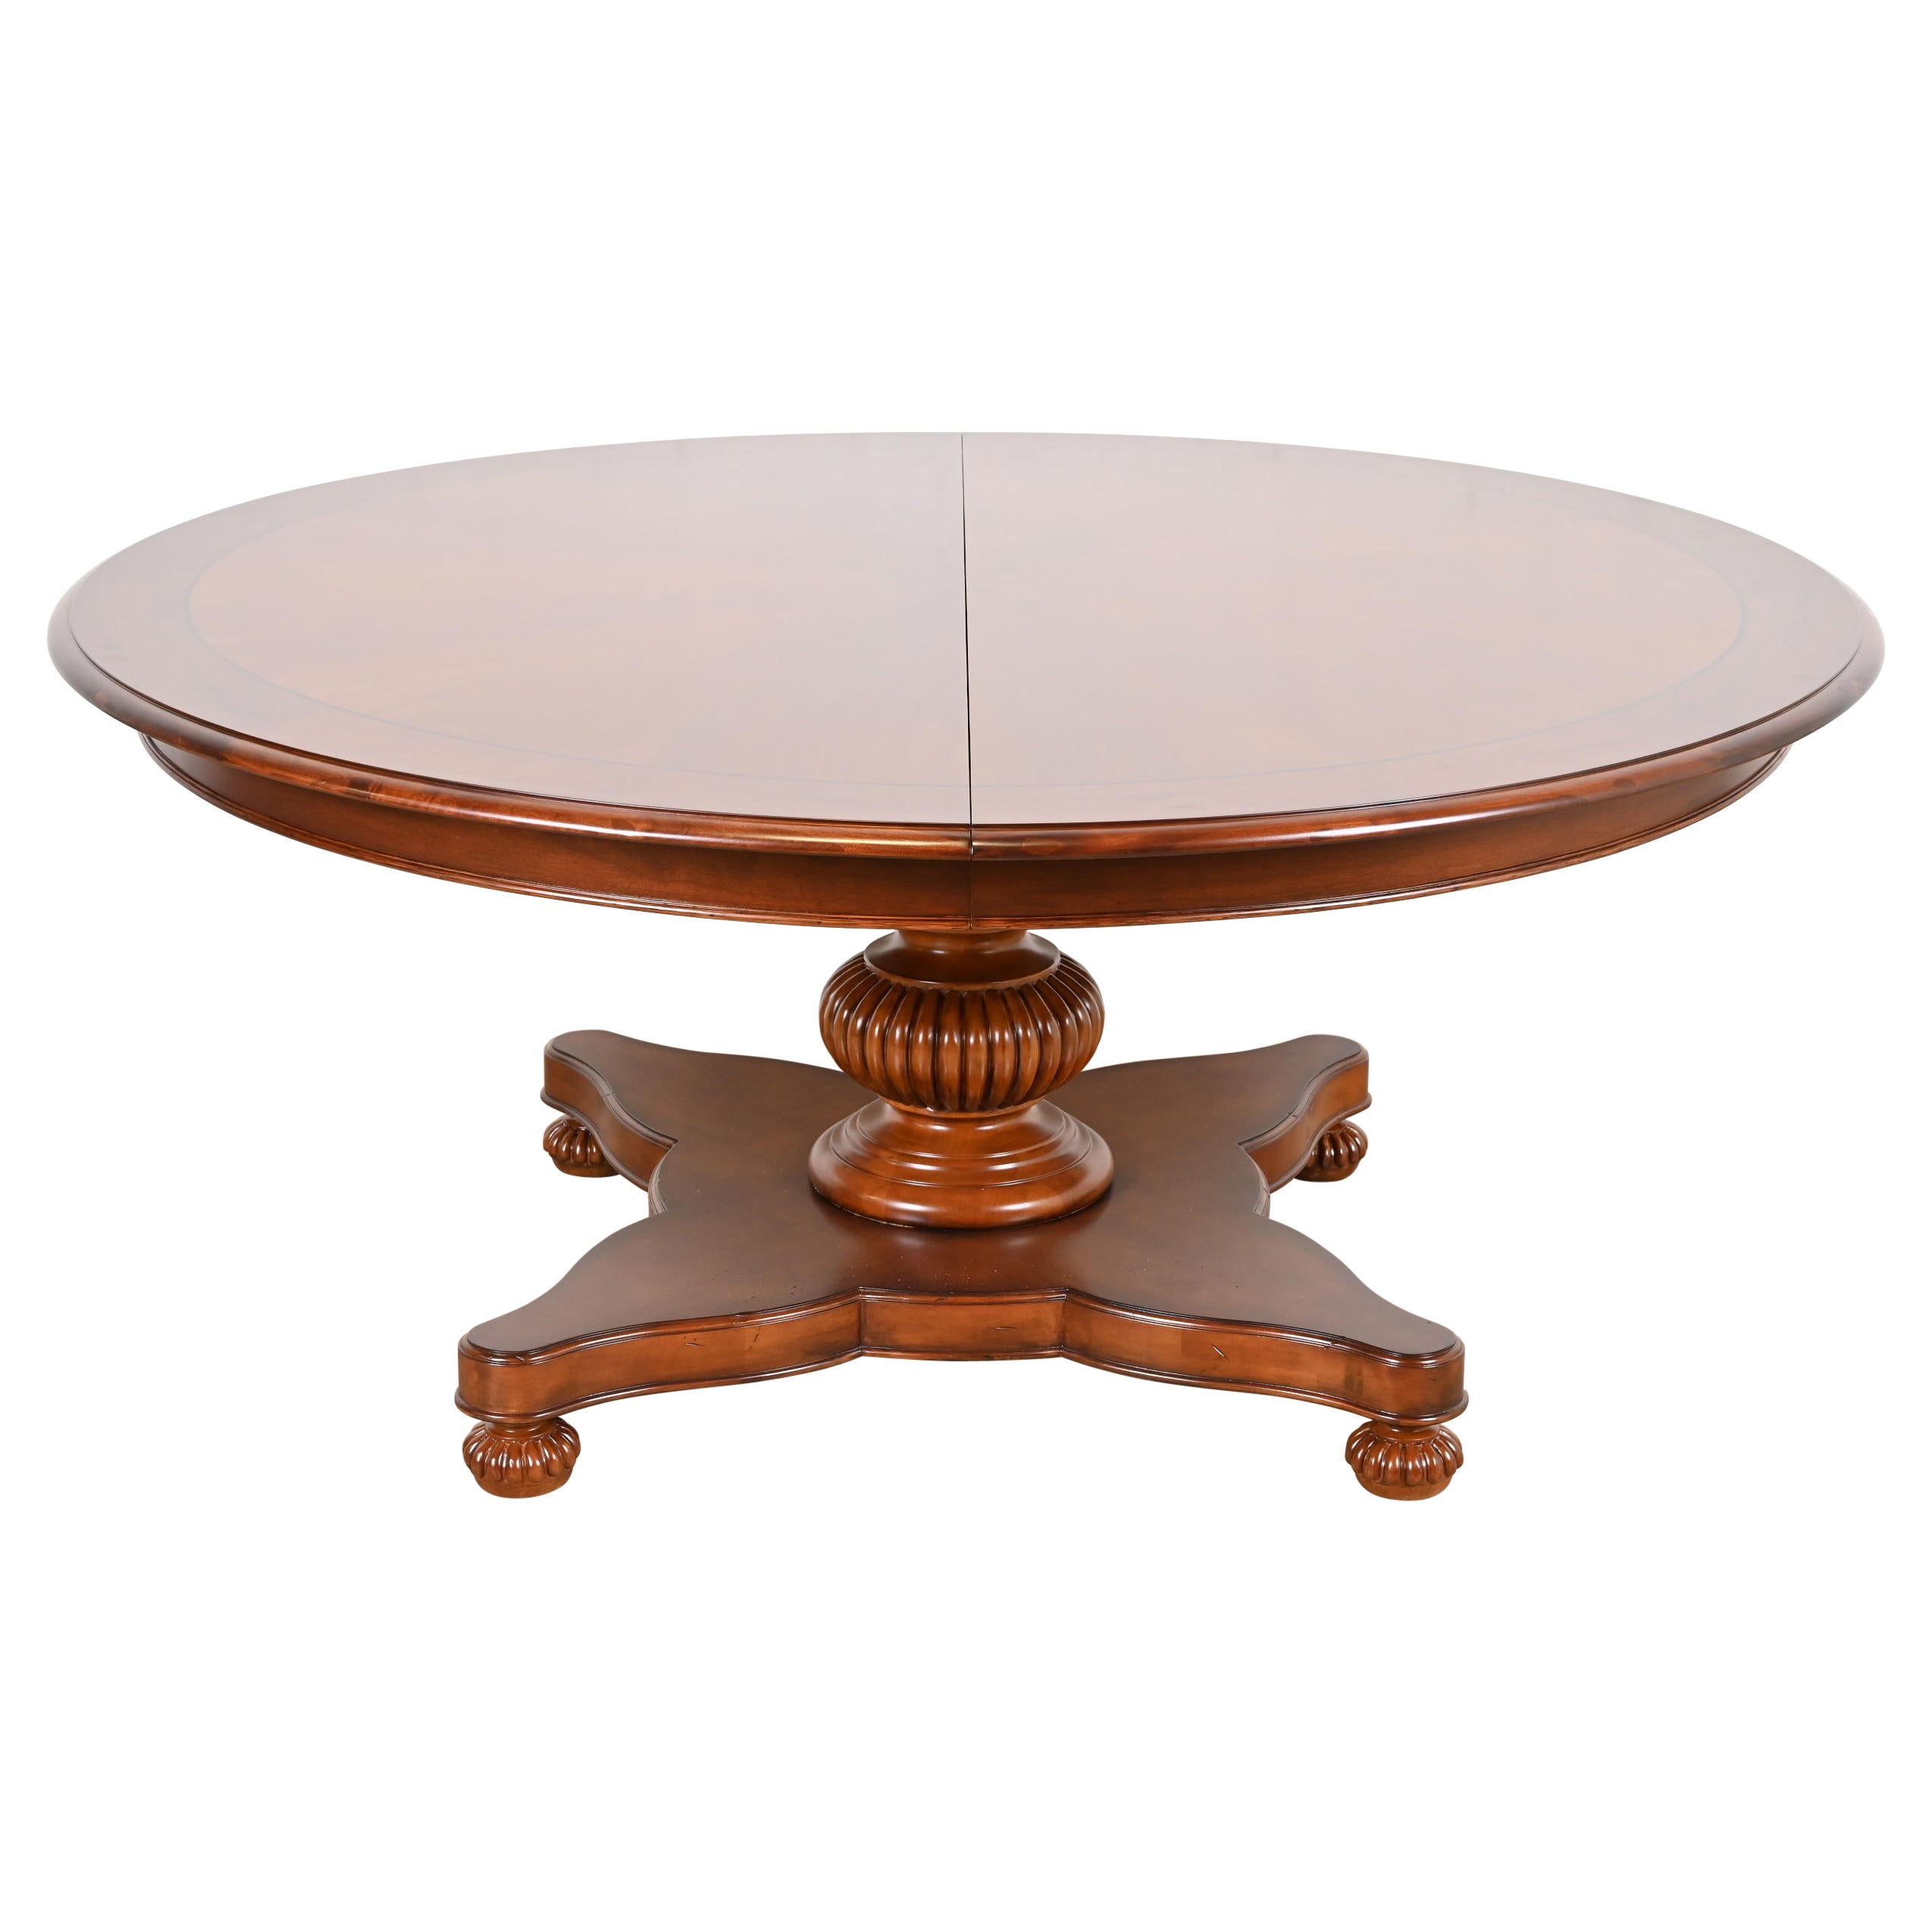 Baker Furniture Italian Empire Cherry Wood Pedestal Dining Table, Refinished For Sale